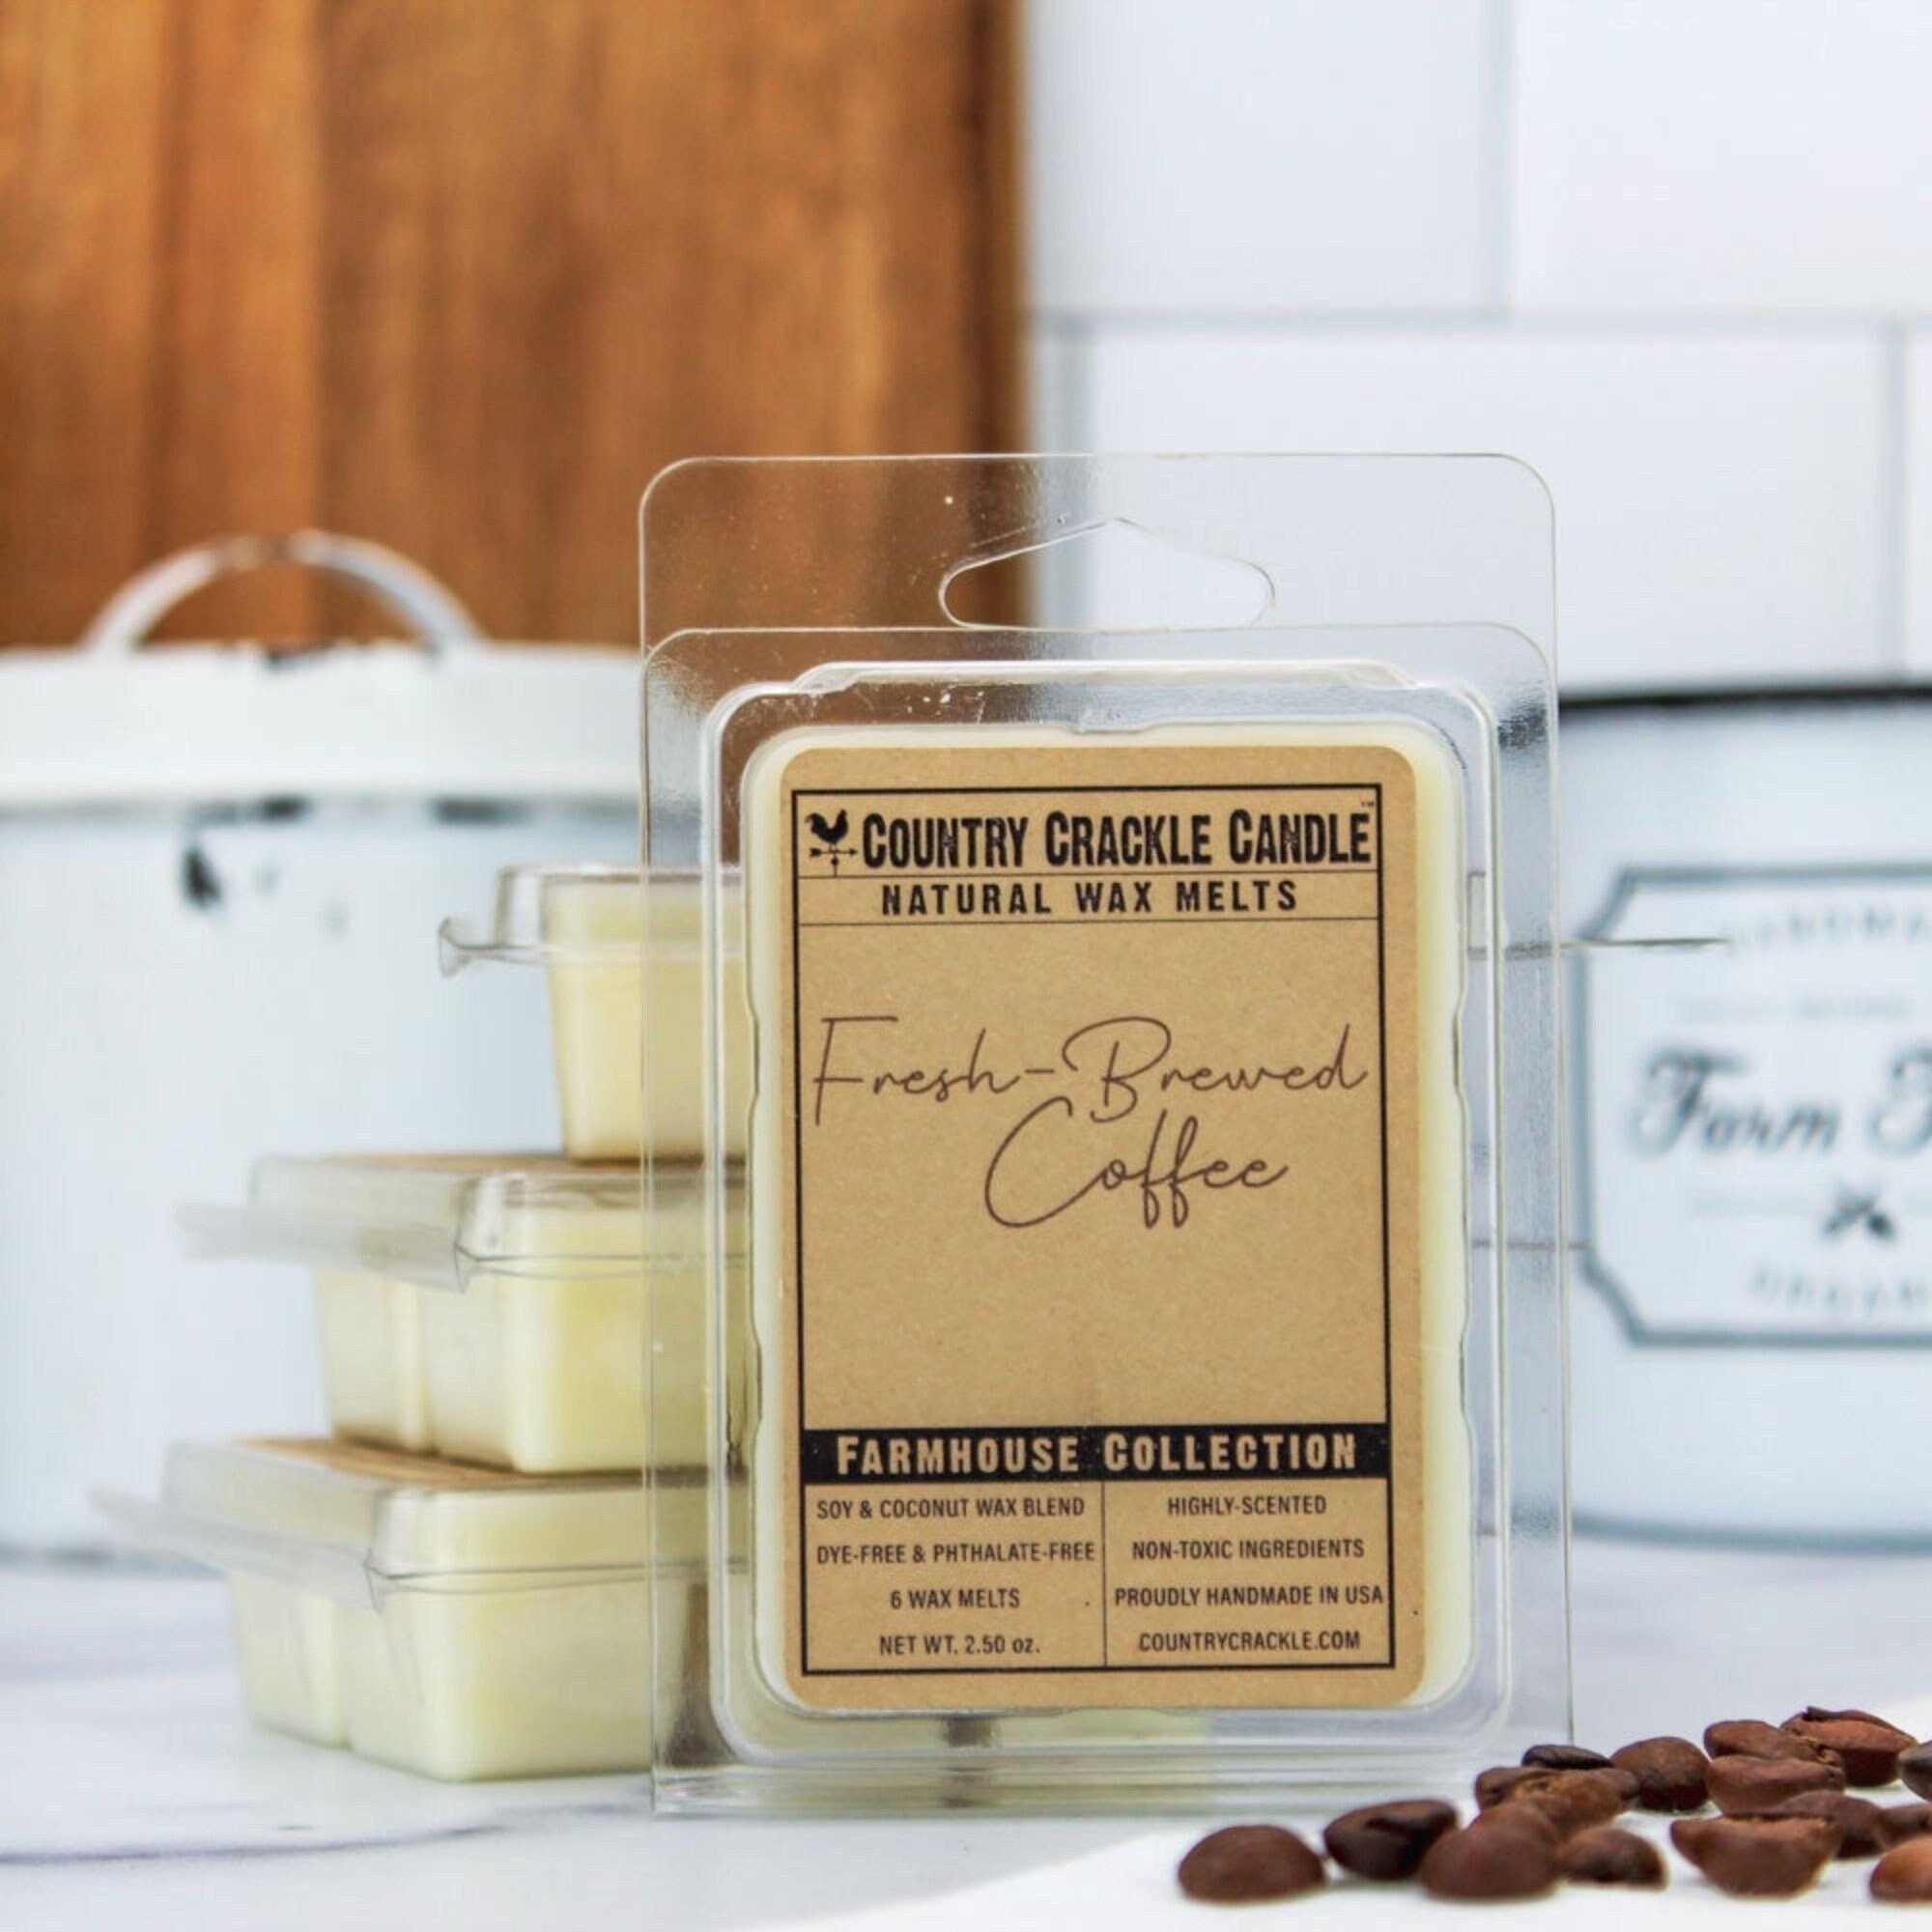 5 pack - Coffee Scented Wax Tart Melts 5 (five) 2 oz Packs